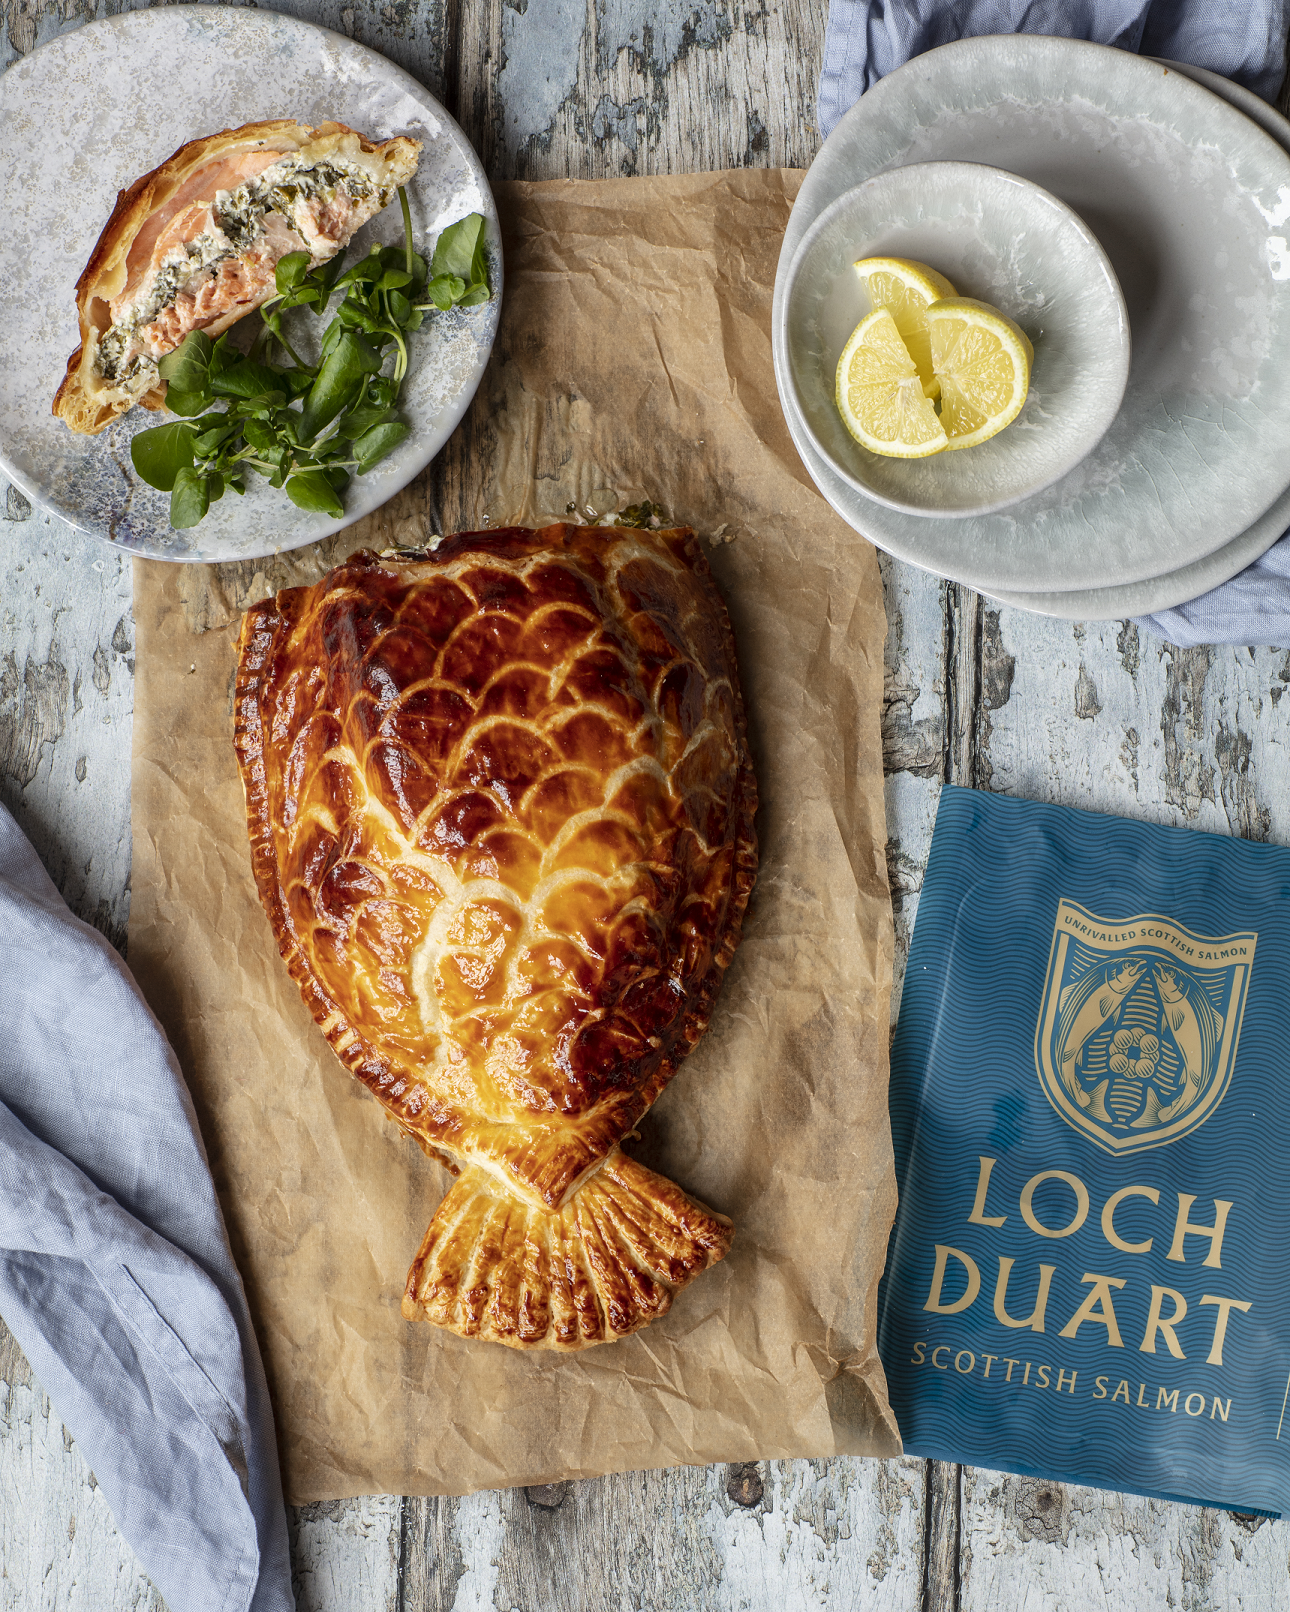 This Morning features The Hebridean Baker cooking Loch Duart Salmon Wellington